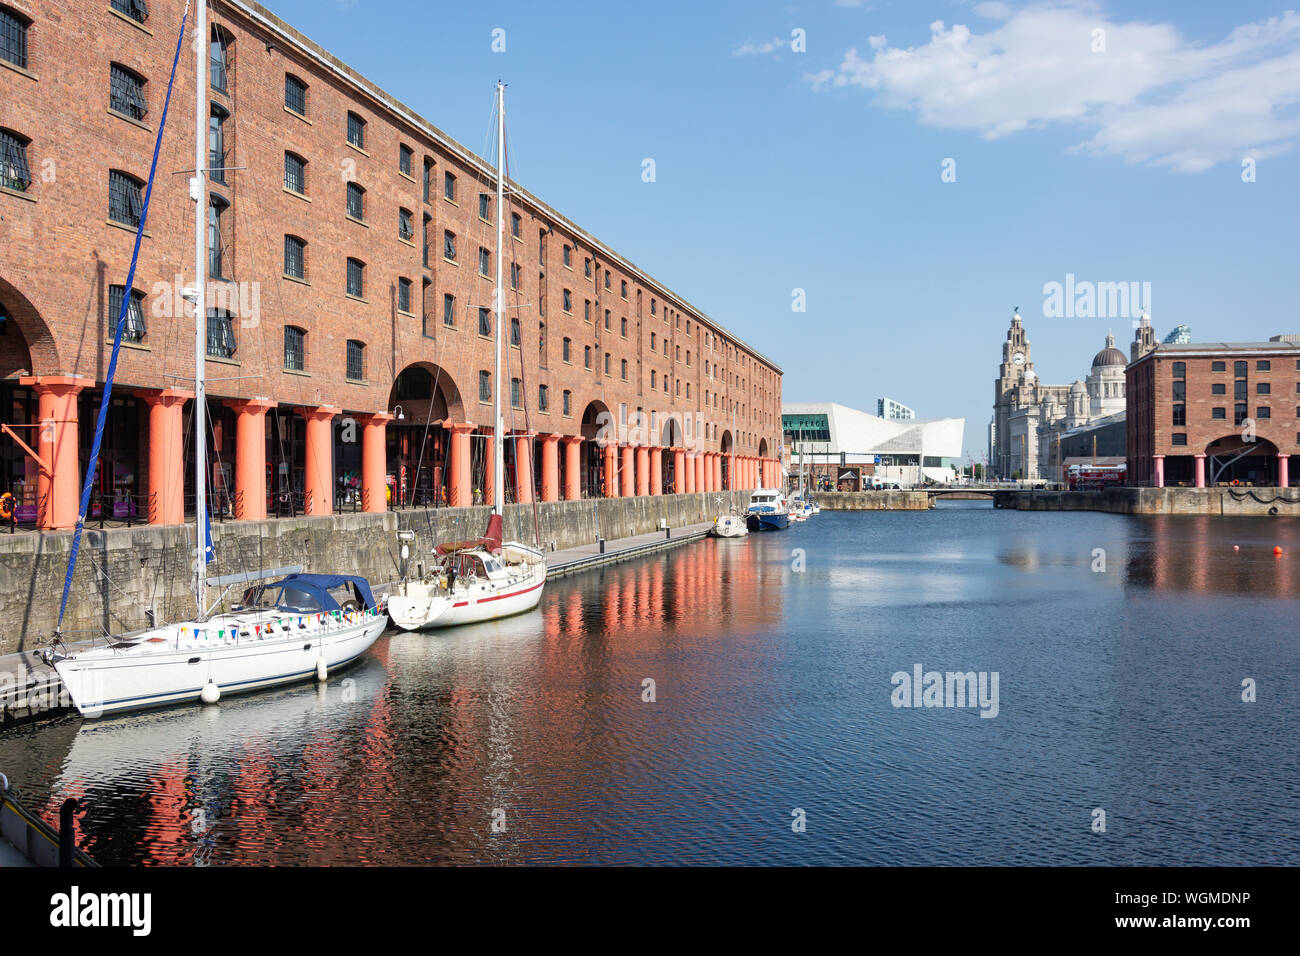 Royal Albert Dock, Liverpool Waterfront, Liverpool, Merseyside, England, United Kingdom Banque D'Images